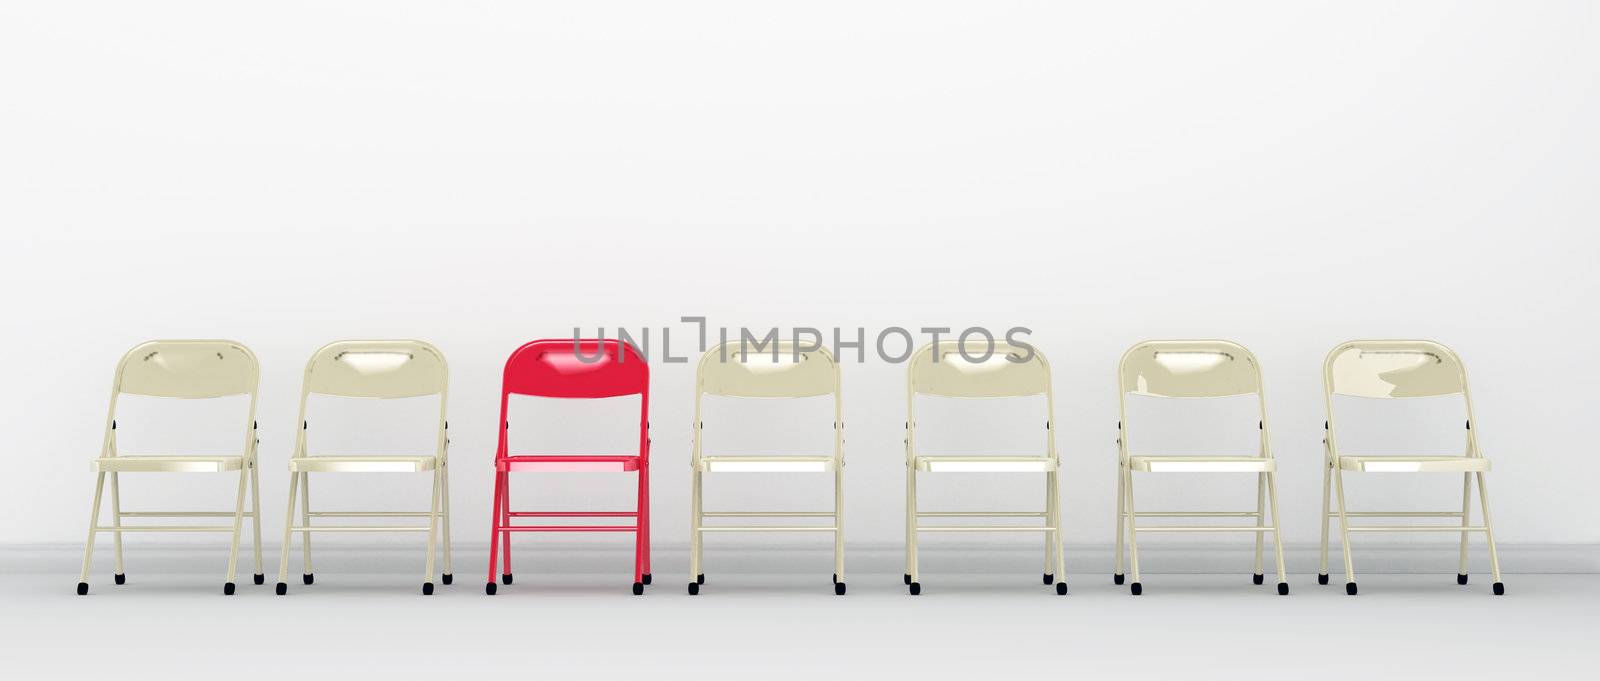 One red chair standing out in a row of chairs by rossstudio